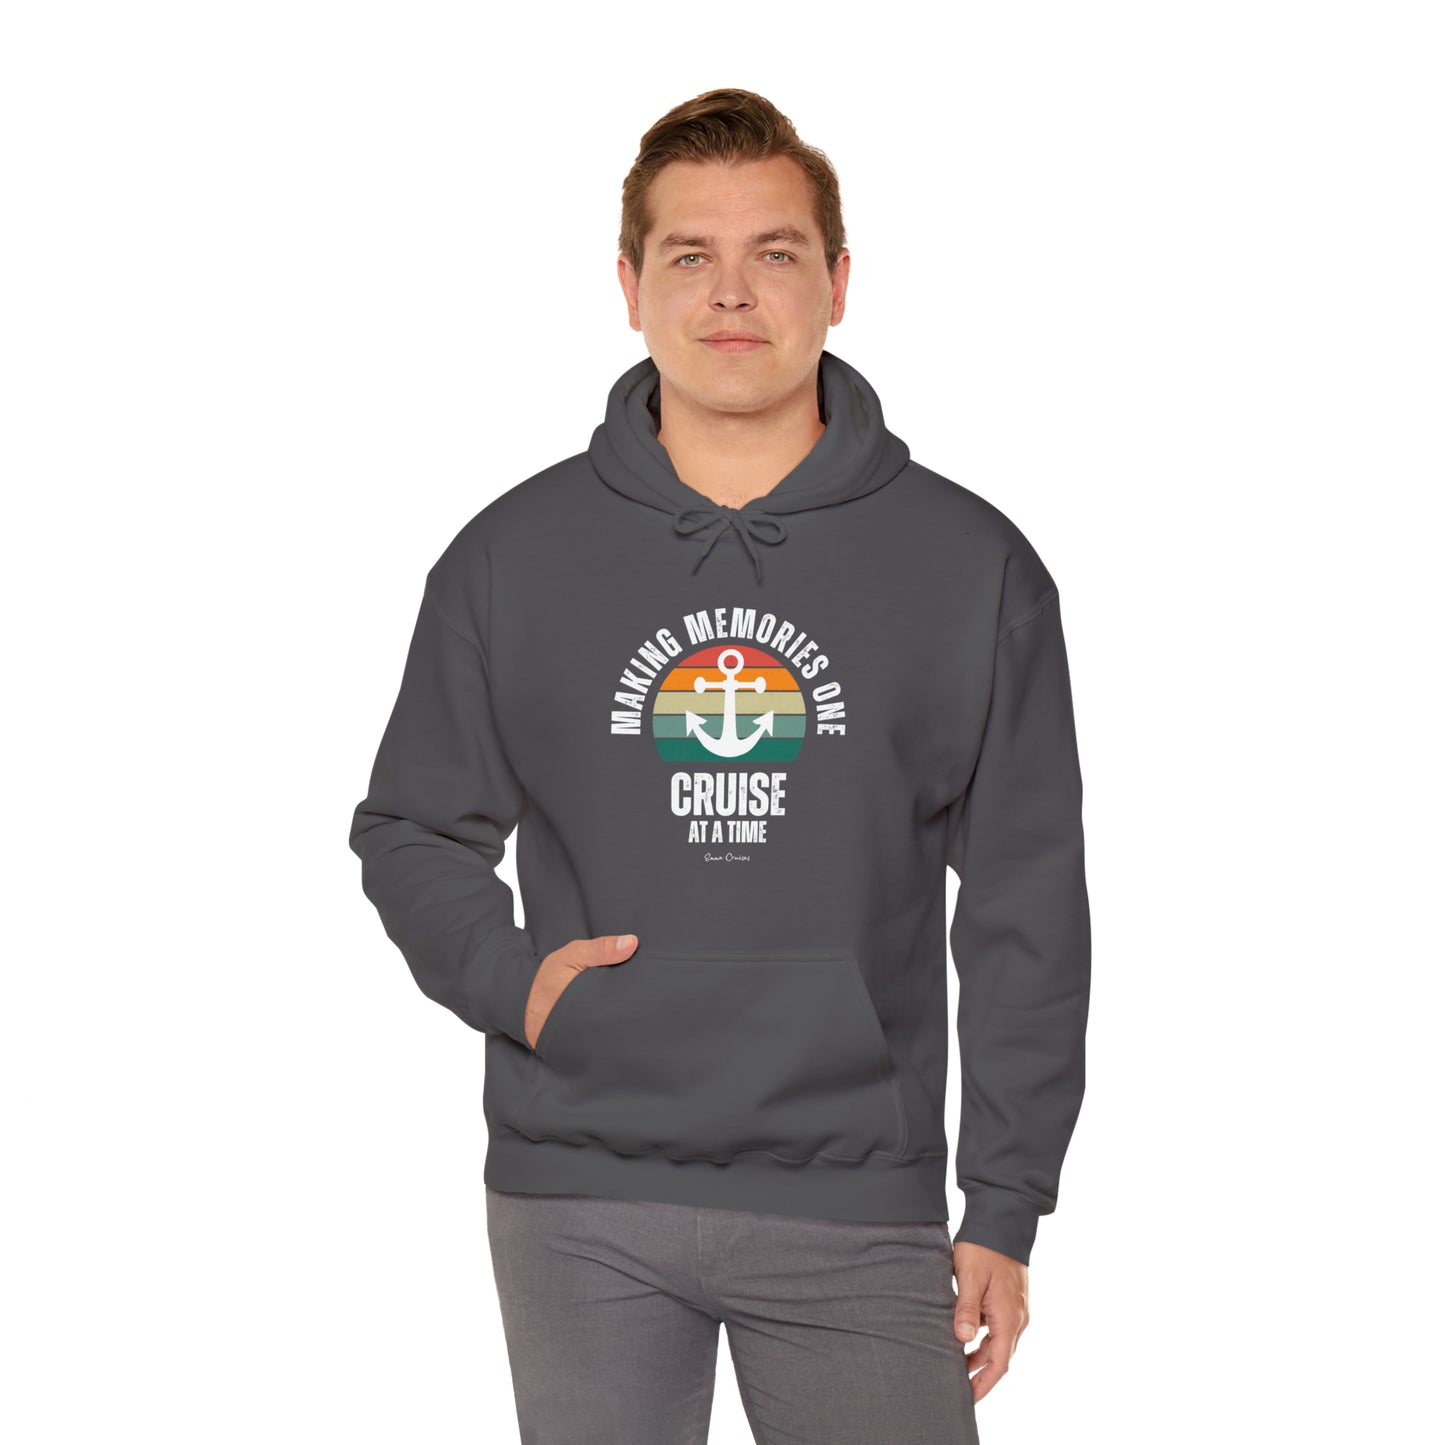 Making Memories One Cruise at a Time - UNISEX Hoodie